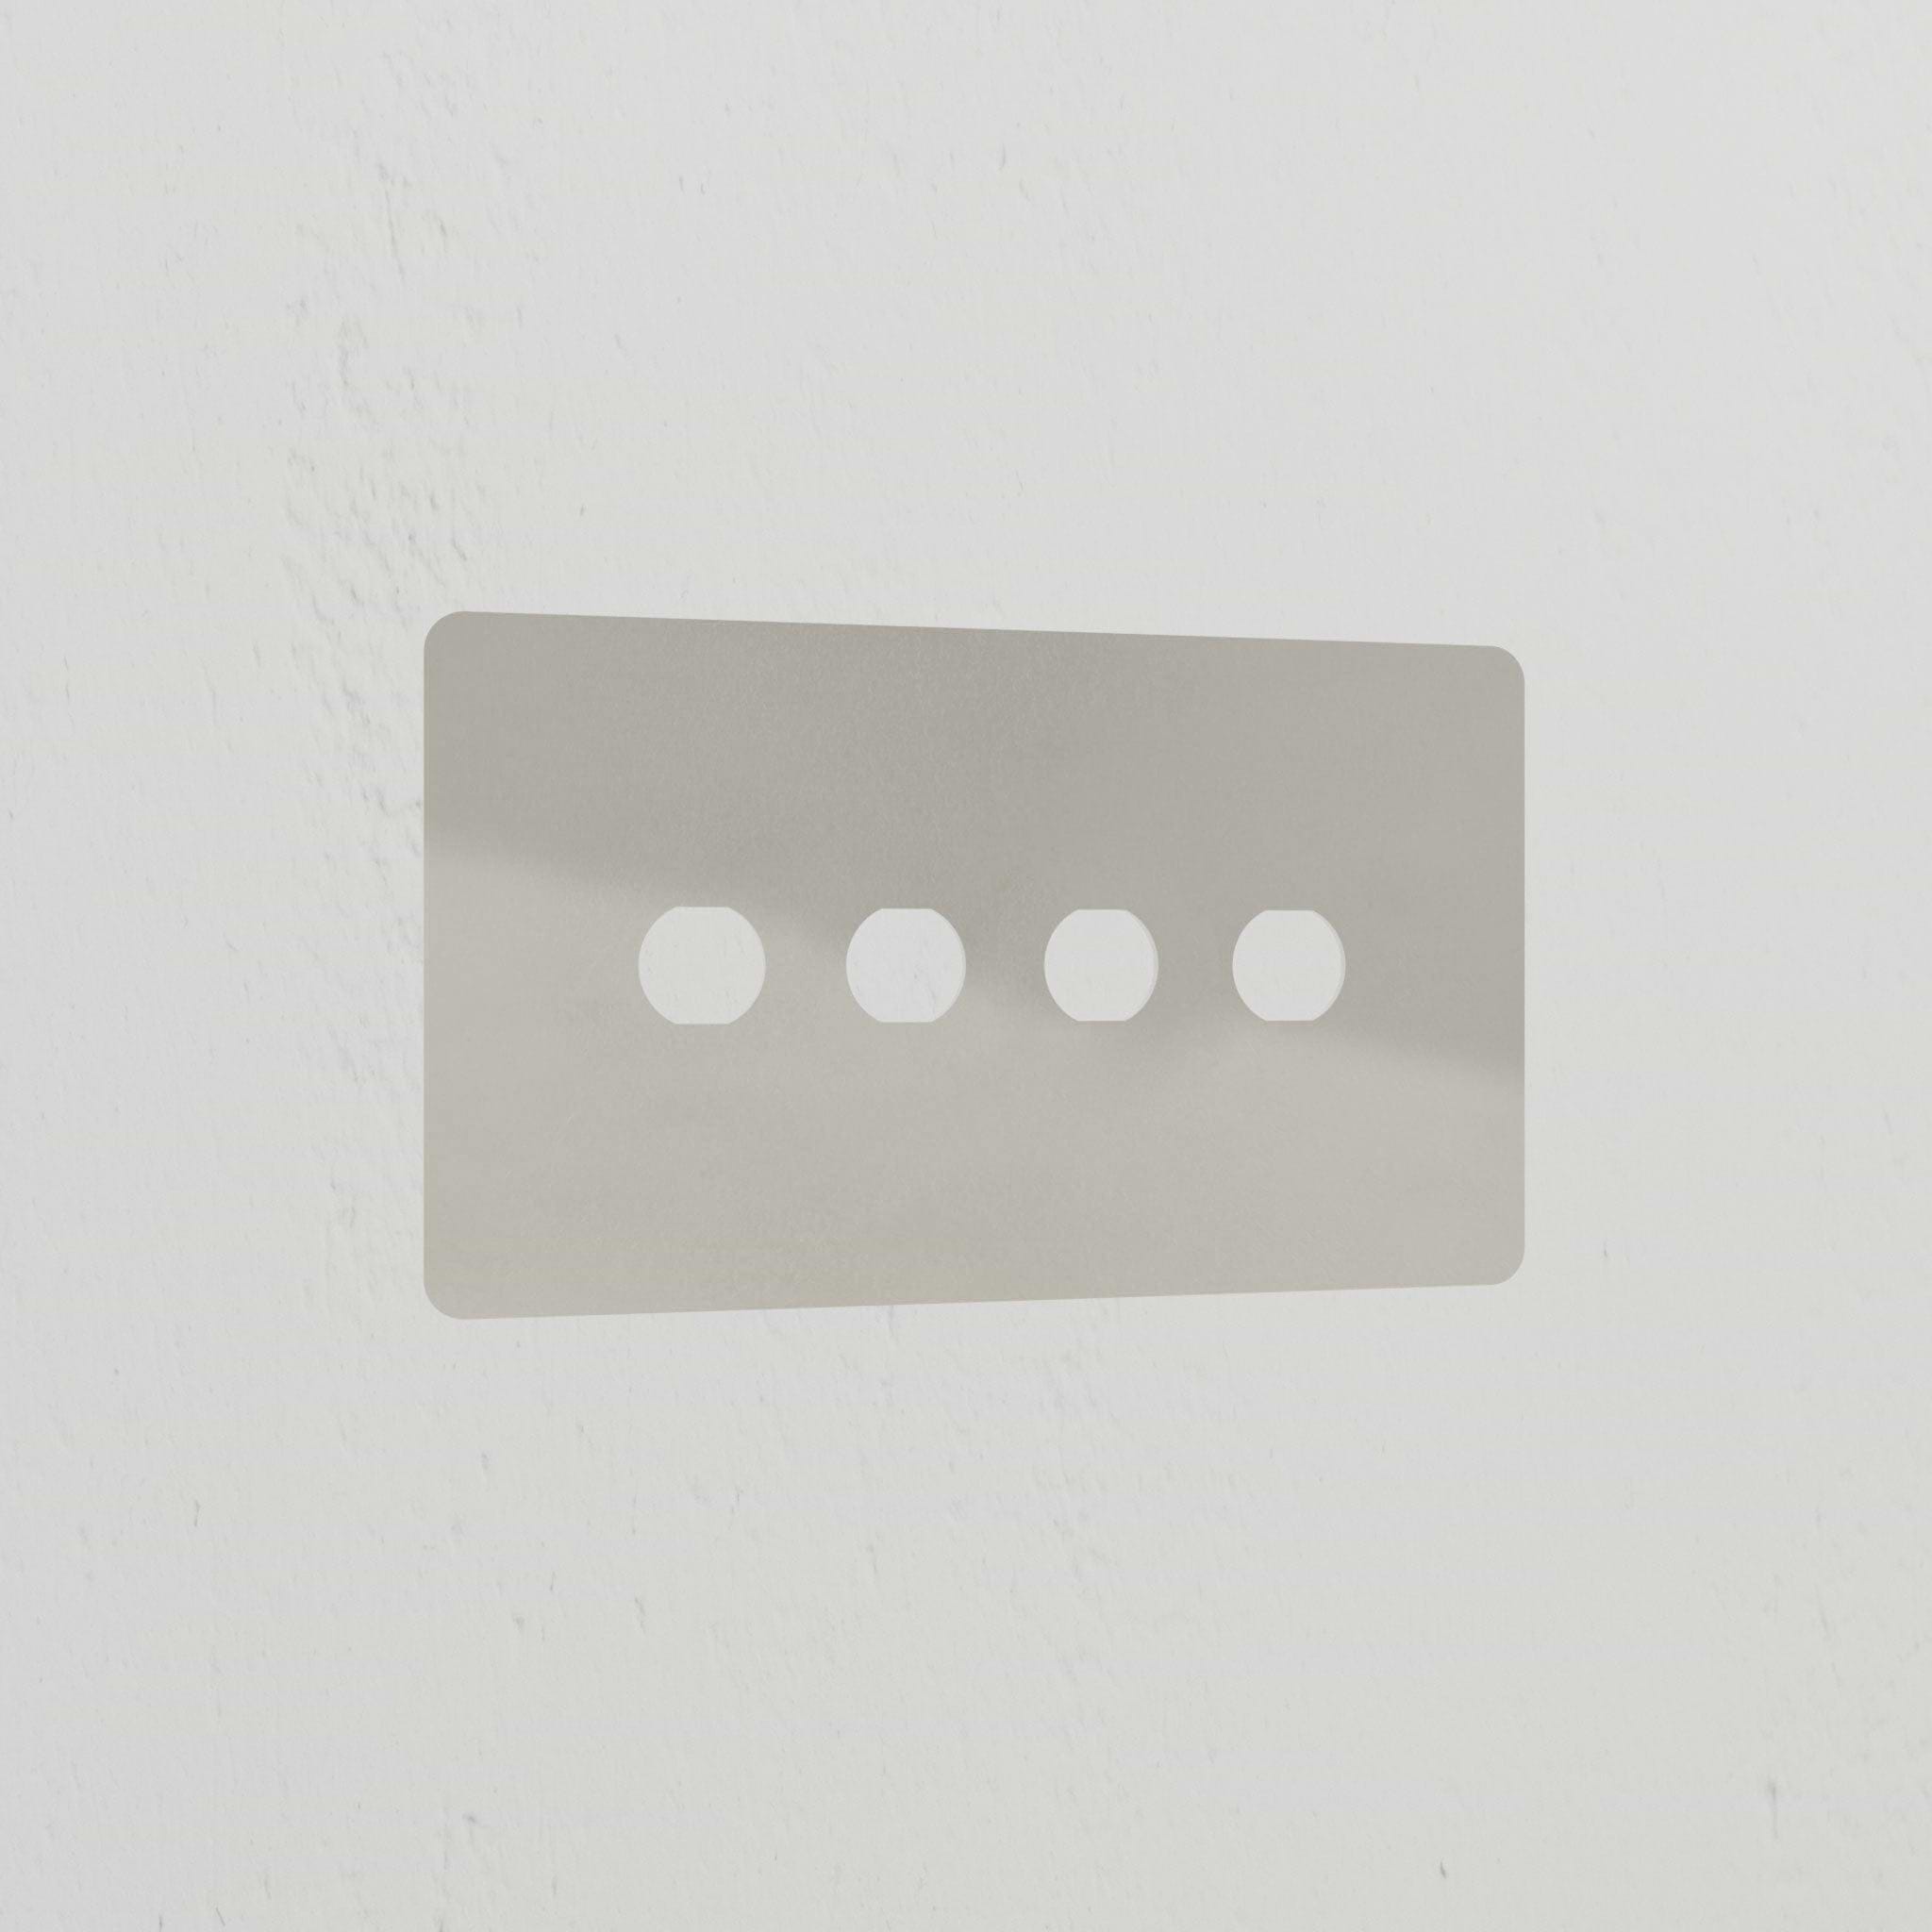 4G Switch Plate - Polished Nickel